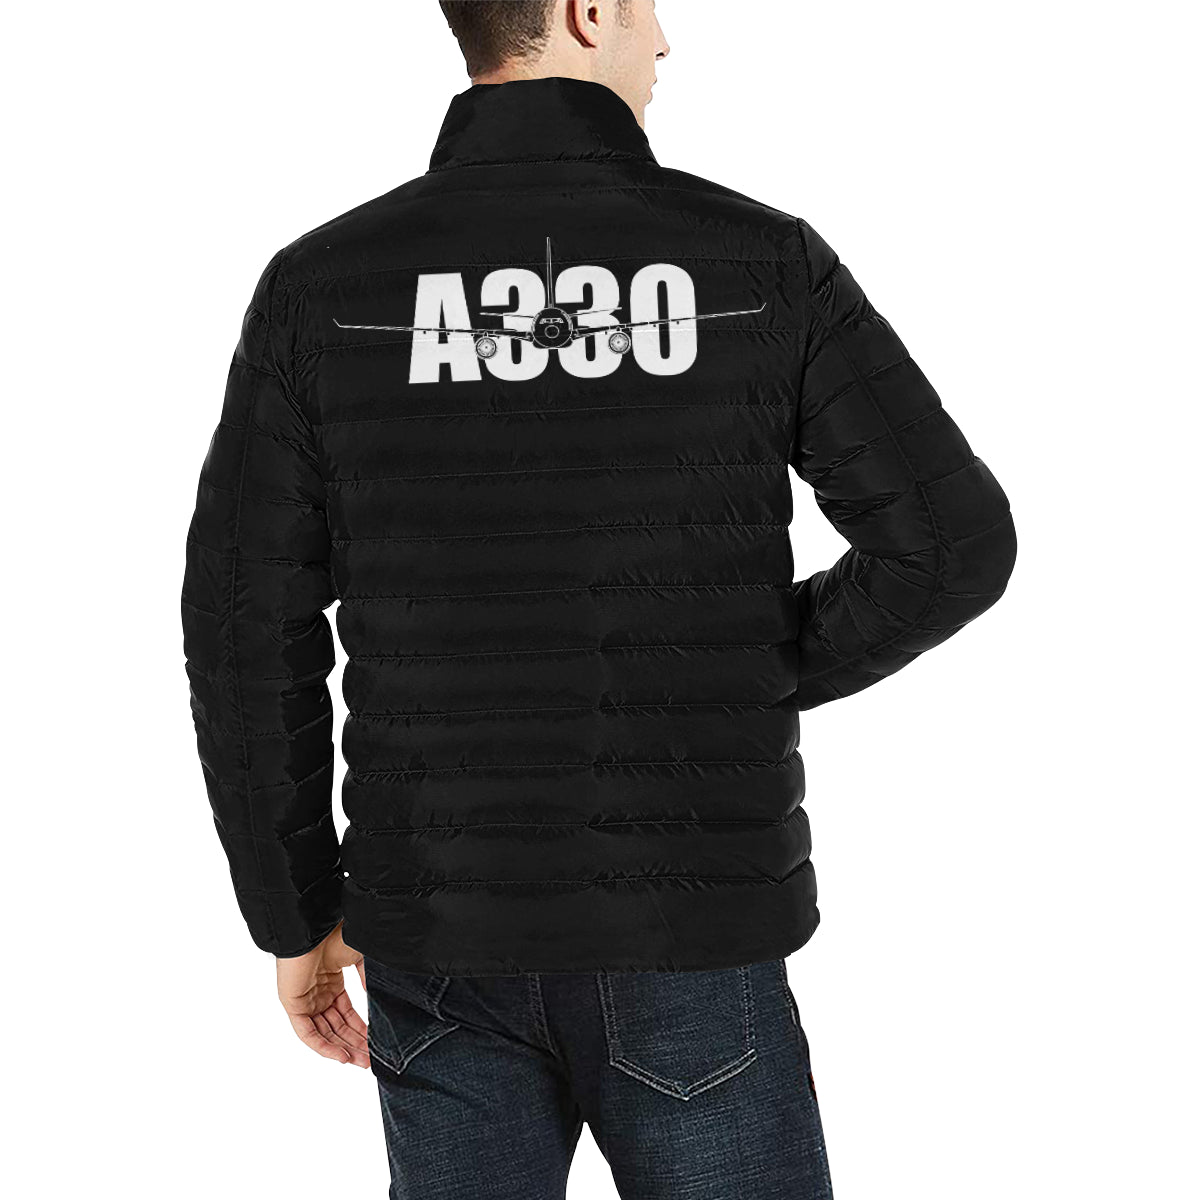 Airbus A330 Men's Stand Collar Padded Jacket e-joyer